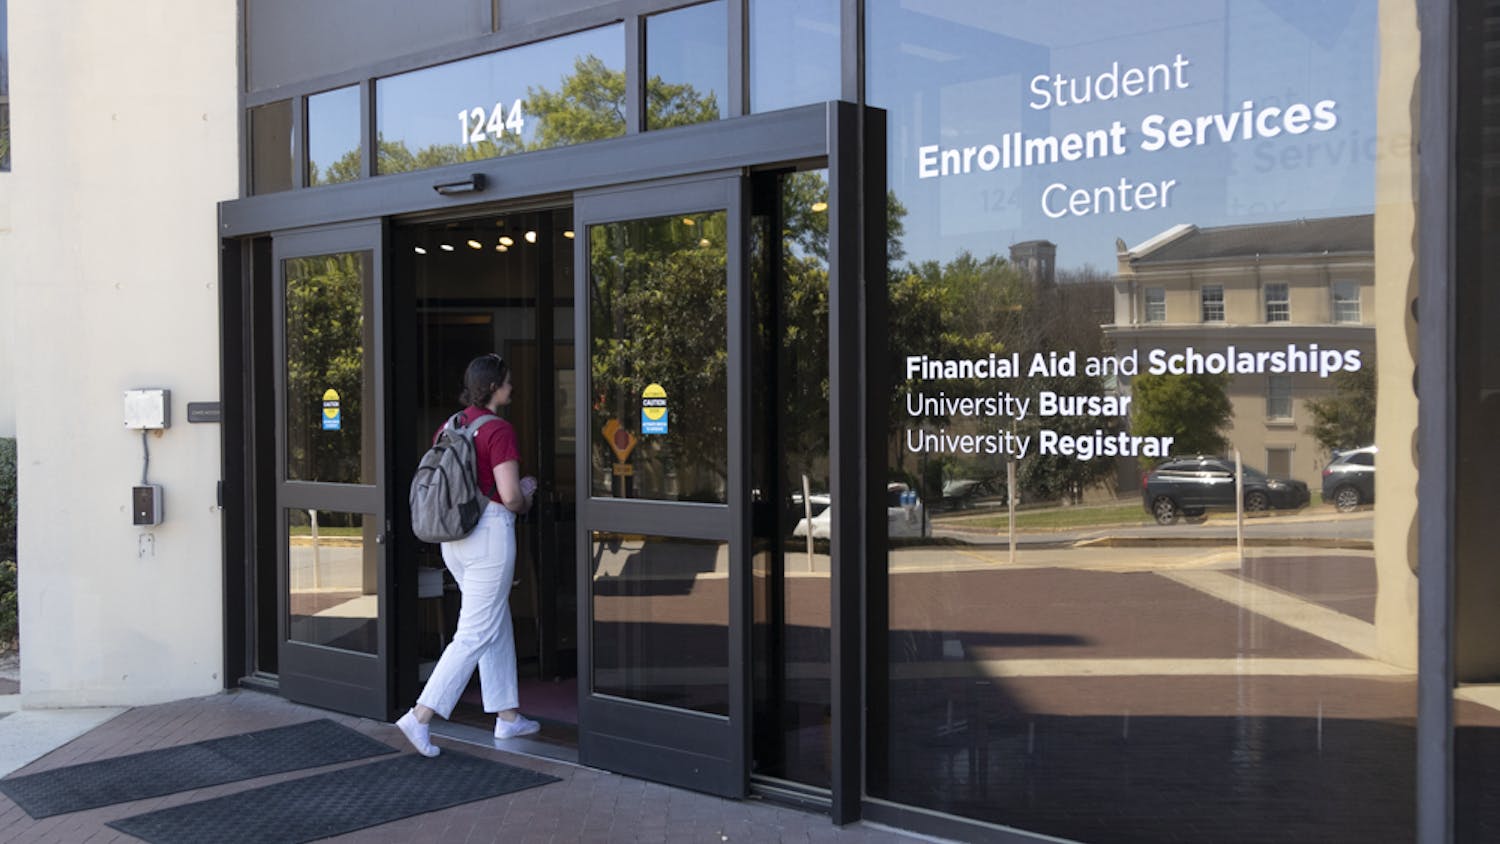 Fourth-year international business student Sarah Cowman walks into the Student Enrollment Services Center on March 21, 2023. The building, which sits on the corner of Blossom and Sumter Street, houses the Office of Student Financial Aid and scholarships, the University Bursar’s Office and the Office of the University Registrar, which are the offices in charge of taking care of student financial obligations.
